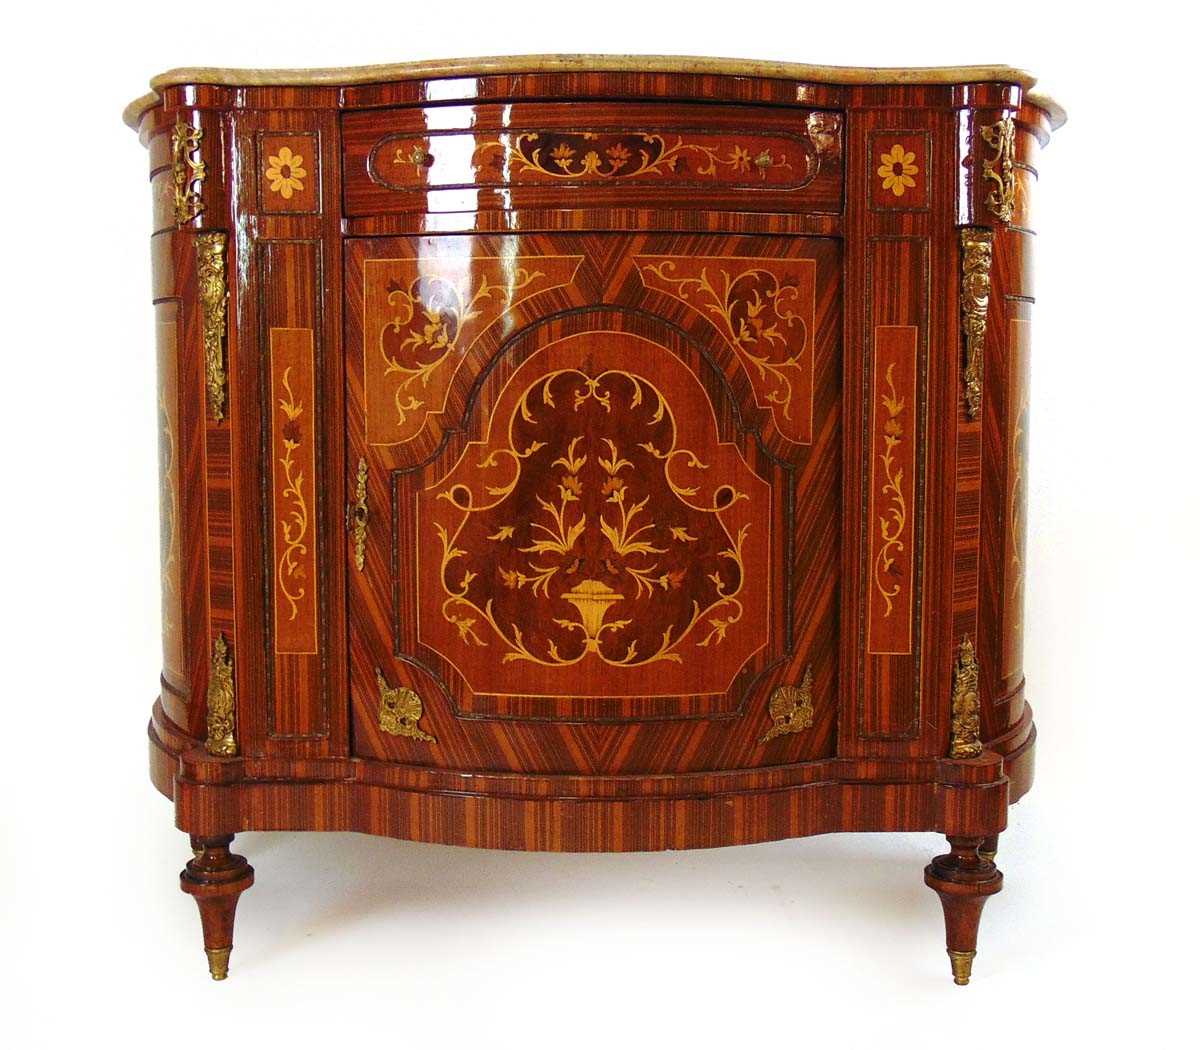 A Louis XV style kingwood veneered, and inlaid, serpentine pier cabinet, 20th century, with marble - Image 2 of 4